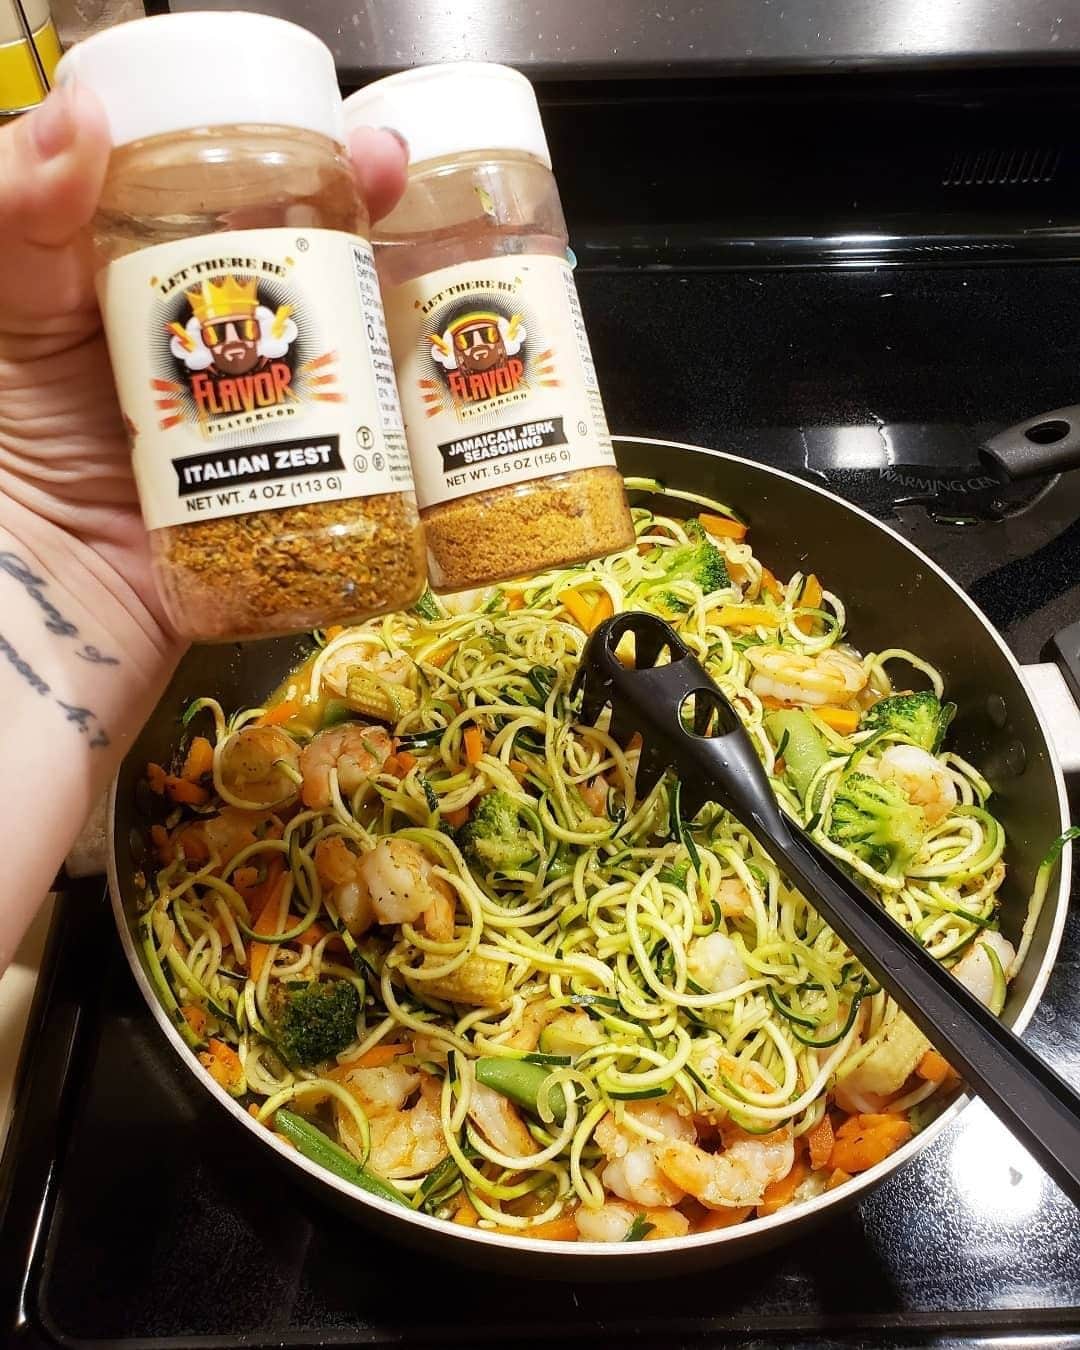 Flavorgod Seasoningsさんのインスタグラム写真 - (Flavorgod SeasoningsInstagram)「@happiness812 with an amazing recipe using our Italian Zest and Jamaican Jerk ⁠ 🔥🔥⁠ -⁠ On Sale here ⬇️⁠ Click the link in the bio -> @flavorgod | www.flavorgod.com⁠ -⁠ ☝️ Flavor god seasons almost all of our food and I have no gmo, bad preservatives, sodium or any of that crap⁠ ✌ This was amazing! If someone tells you this is hard work let me break it down for you⁠ 💢3 zucchinis madeinto noodles=3minutes $2.50⁠ 💢1 bag frozen asian medley veggies from birds eye=3min $2.50⁠ 💢30 precooked frozen shrimp (had to peel) = 8 min (bag of 75+) $23.00⁠ 💢Stir all together start to finish with blending seasonings =15 minutes⁠ 👌 I should start an insta page "fancy meals on paper plates" haha⁠ -⁠ Flavor God Seasonings are:⁠ 💥 Zero Calories per Serving ⁠ 🙌 0 Sugar per Serving⁠ 🔥 KETO & PALEO⁠ 🌱 GLUTEN FREE & KOSHER⁠ ☀️ VEGAN-FRIENDLY ⁠ 🌊 Low salt⁠ ⚡️ NO MSG⁠ 🚫 NO SOY⁠ 🥛 DAIRY FREE *except Ranch ⁠ 🌿 All Natural & Made Fresh⁠ ⏰ Shelf life is 24 months⁠ -⁠ -⁠ #food #foodie #flavorgod #seasonings #glutenfree #mealprep  #keto #paleo #vegan #kosher #breakfast #lunch #dinner #yummy #delicious #foodporn ⁠」7月16日 10時00分 - flavorgod